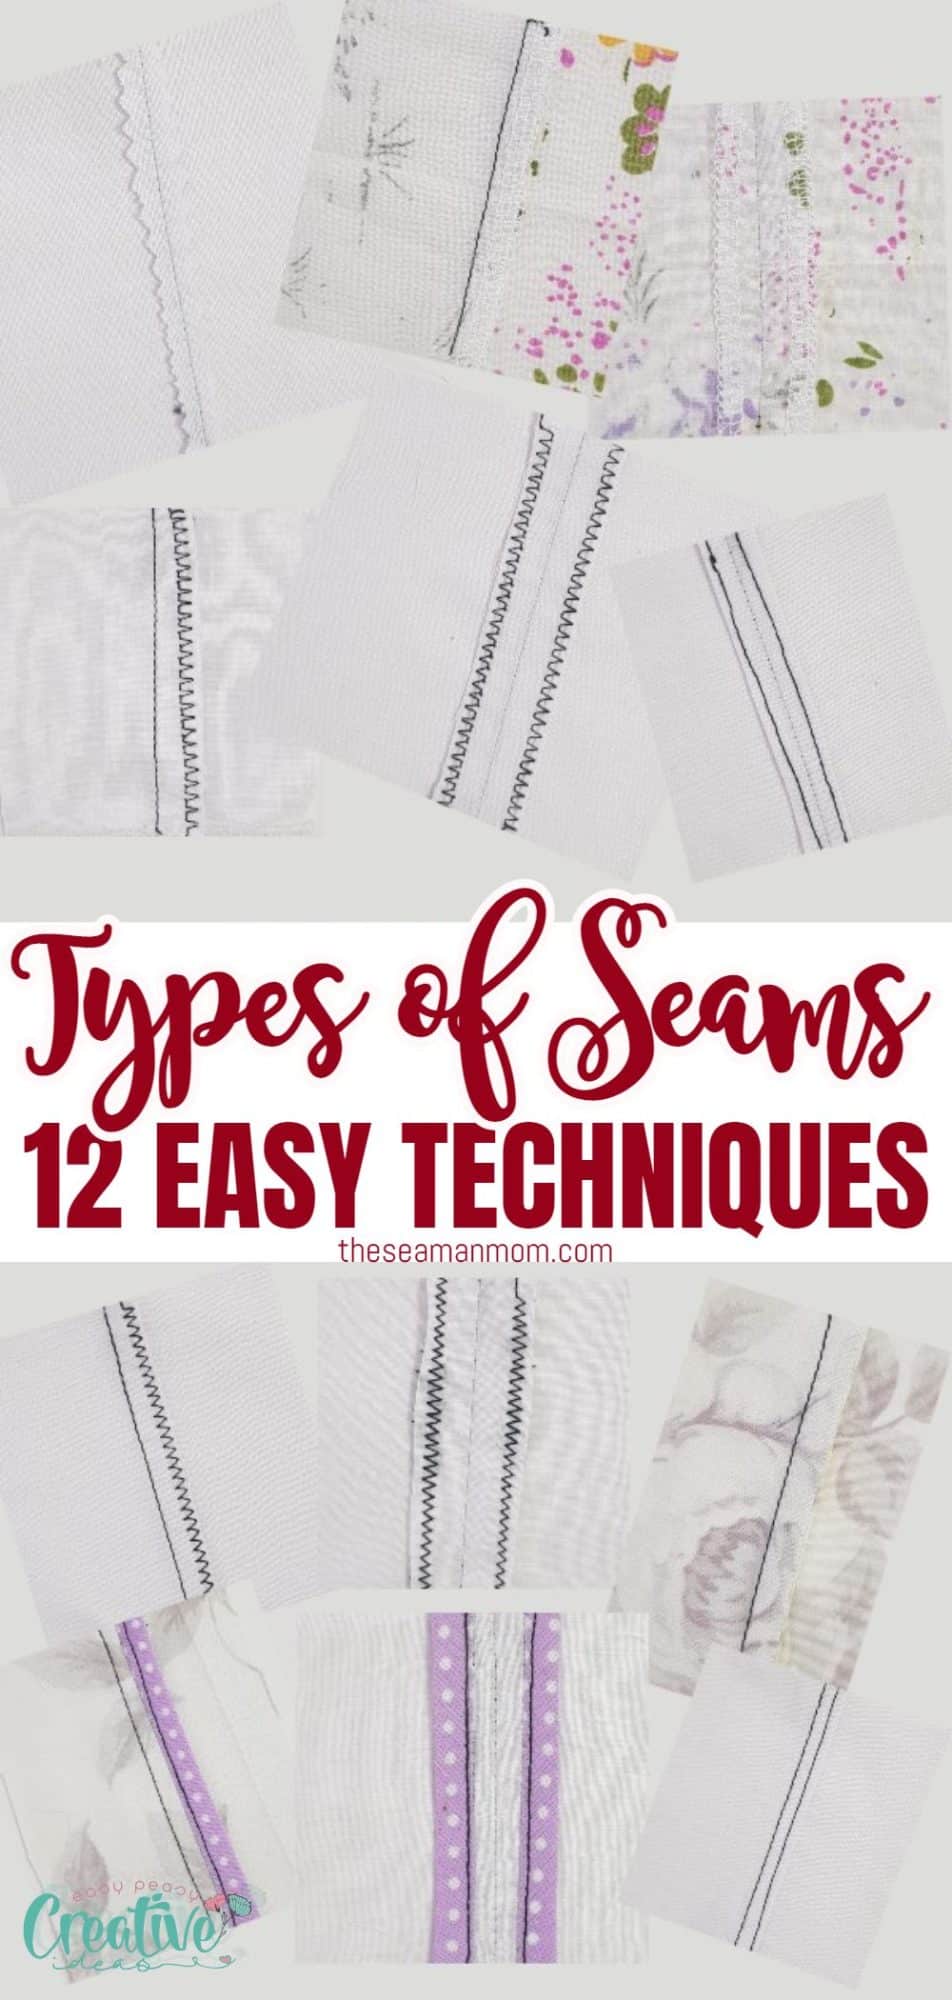 Seam Types - Reference Guide to Different Seam Types